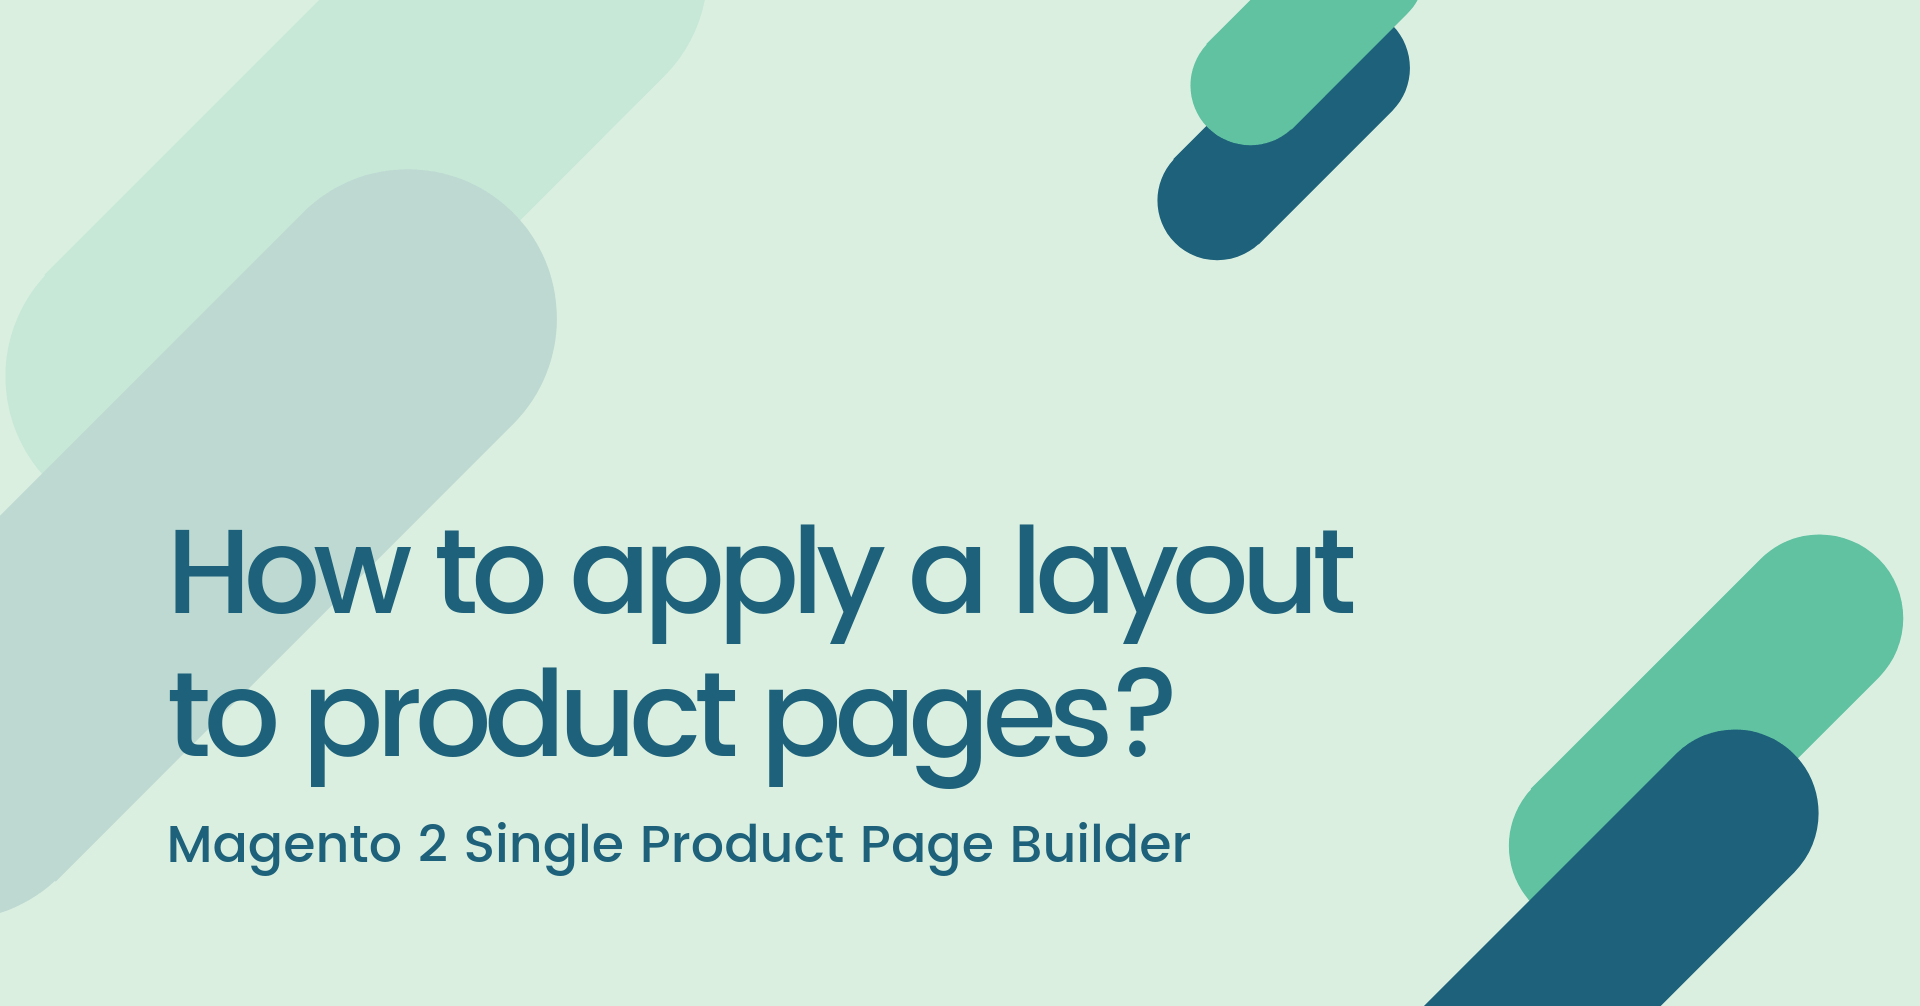 How to apply a layout to product pages?